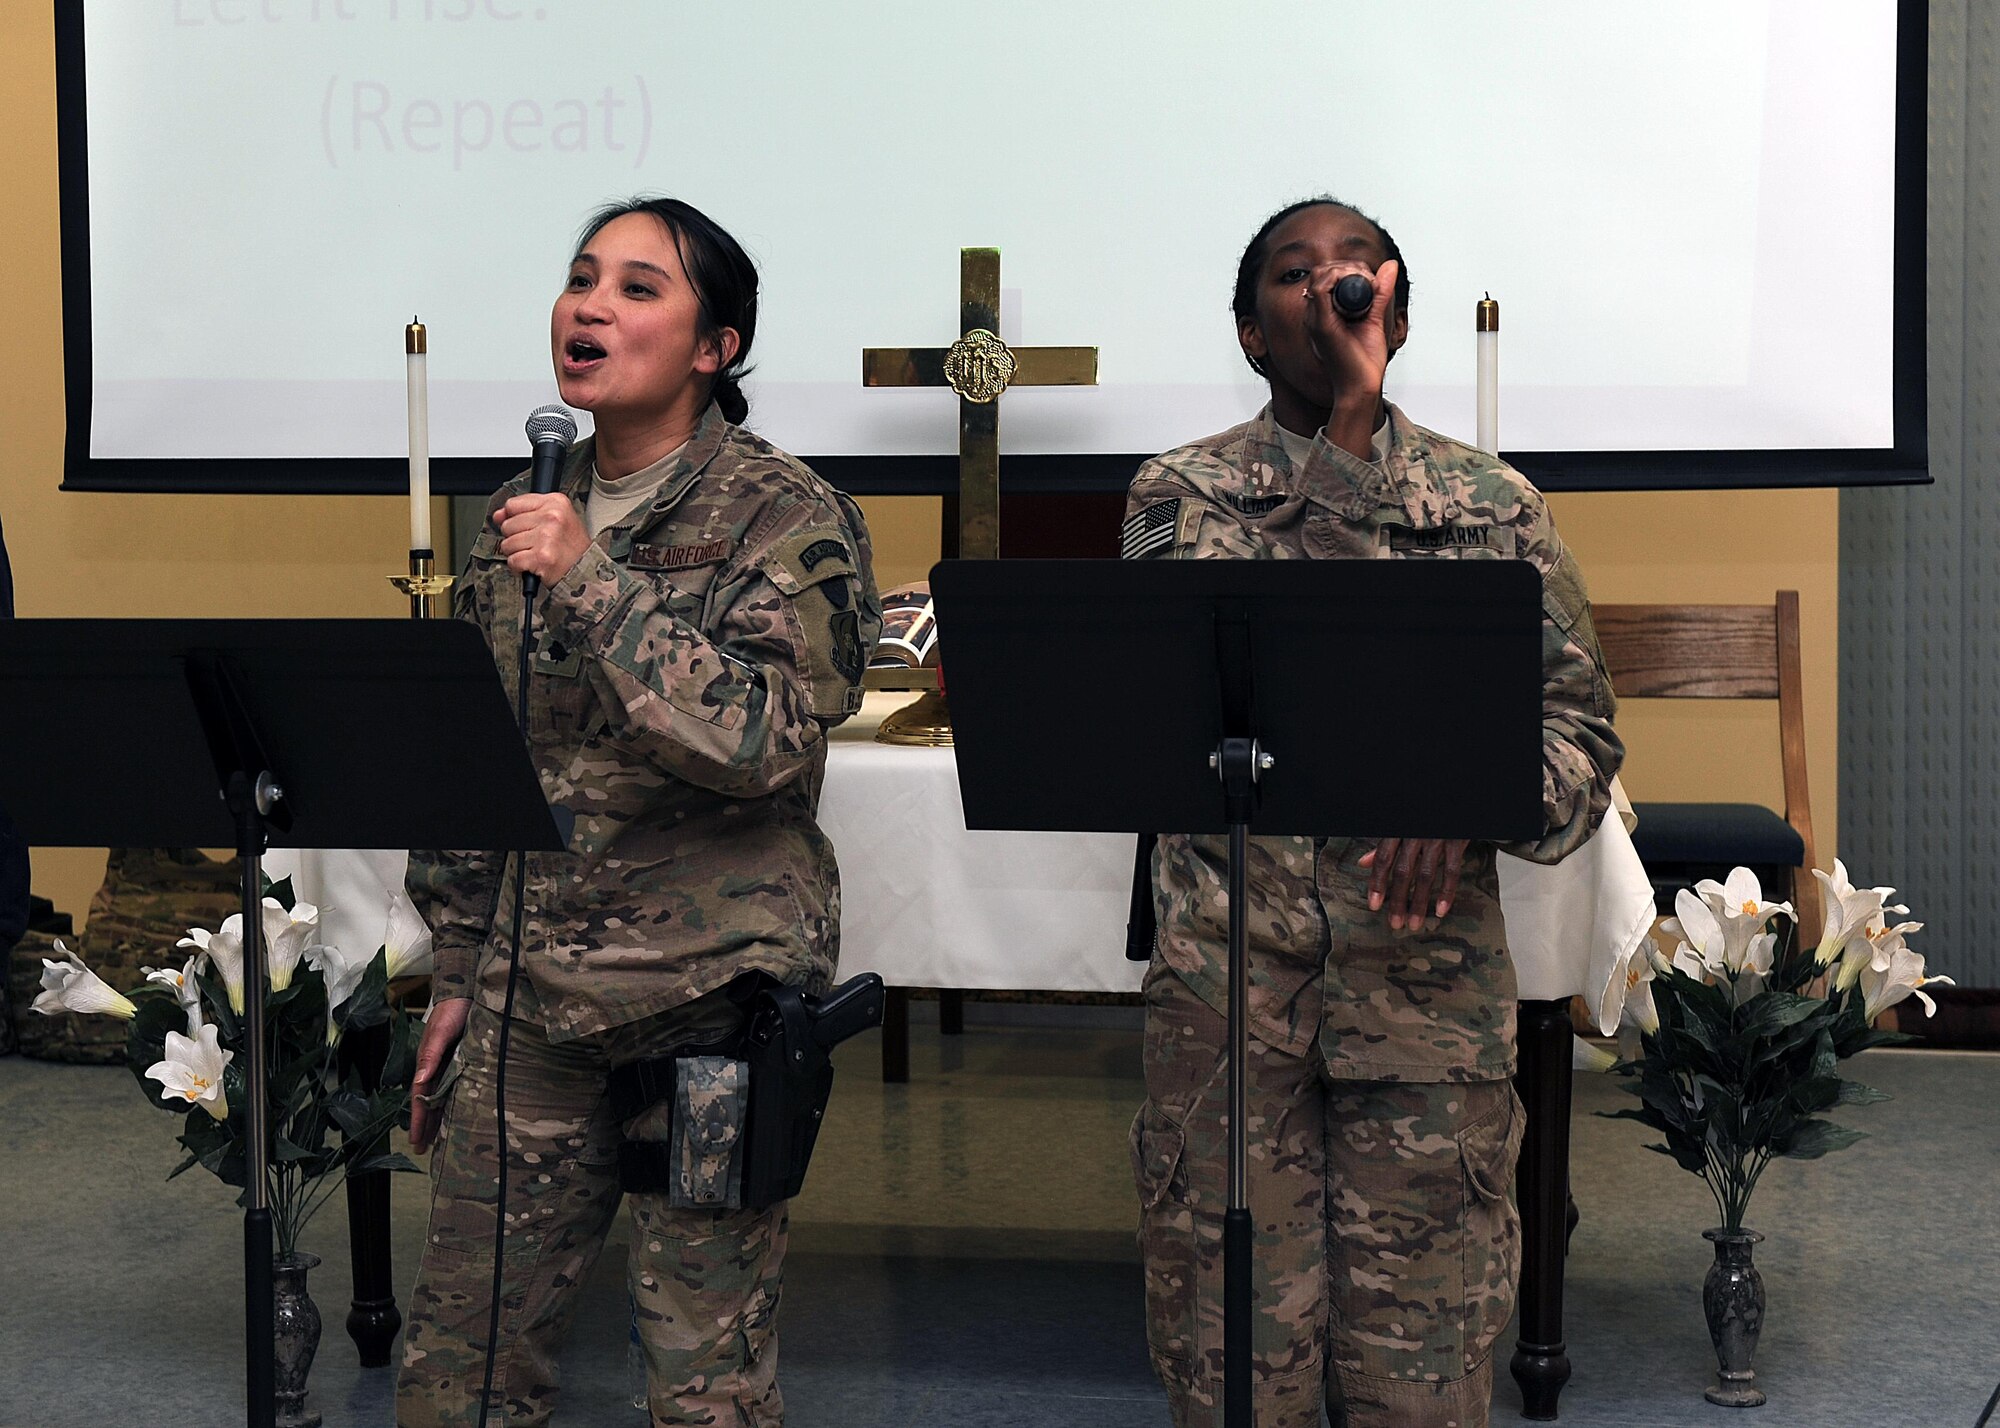 U.S. servicemembers sing during the praise and worship portion of an evening church service conducted by U.S. Air Force Maj. William Braswell, 455th Air Expeditionary Wing chaplain, Feb. 15, 2015 at Hamid Karzai International Airport in Kabul. Braswell, accompanied by U.S. Air Force Tech. Sgt. Aleric Hebert, 455 AEW chaplain assistant, travels throughout the U.S. Air Force Central Command Area of Responsibility engaging with Airmen and conducting church services to ensure deployed servicemembers are spiritually fit to fight.(U.S. Air Force photo by Staff Sgt. Whitney Amstutz/released)